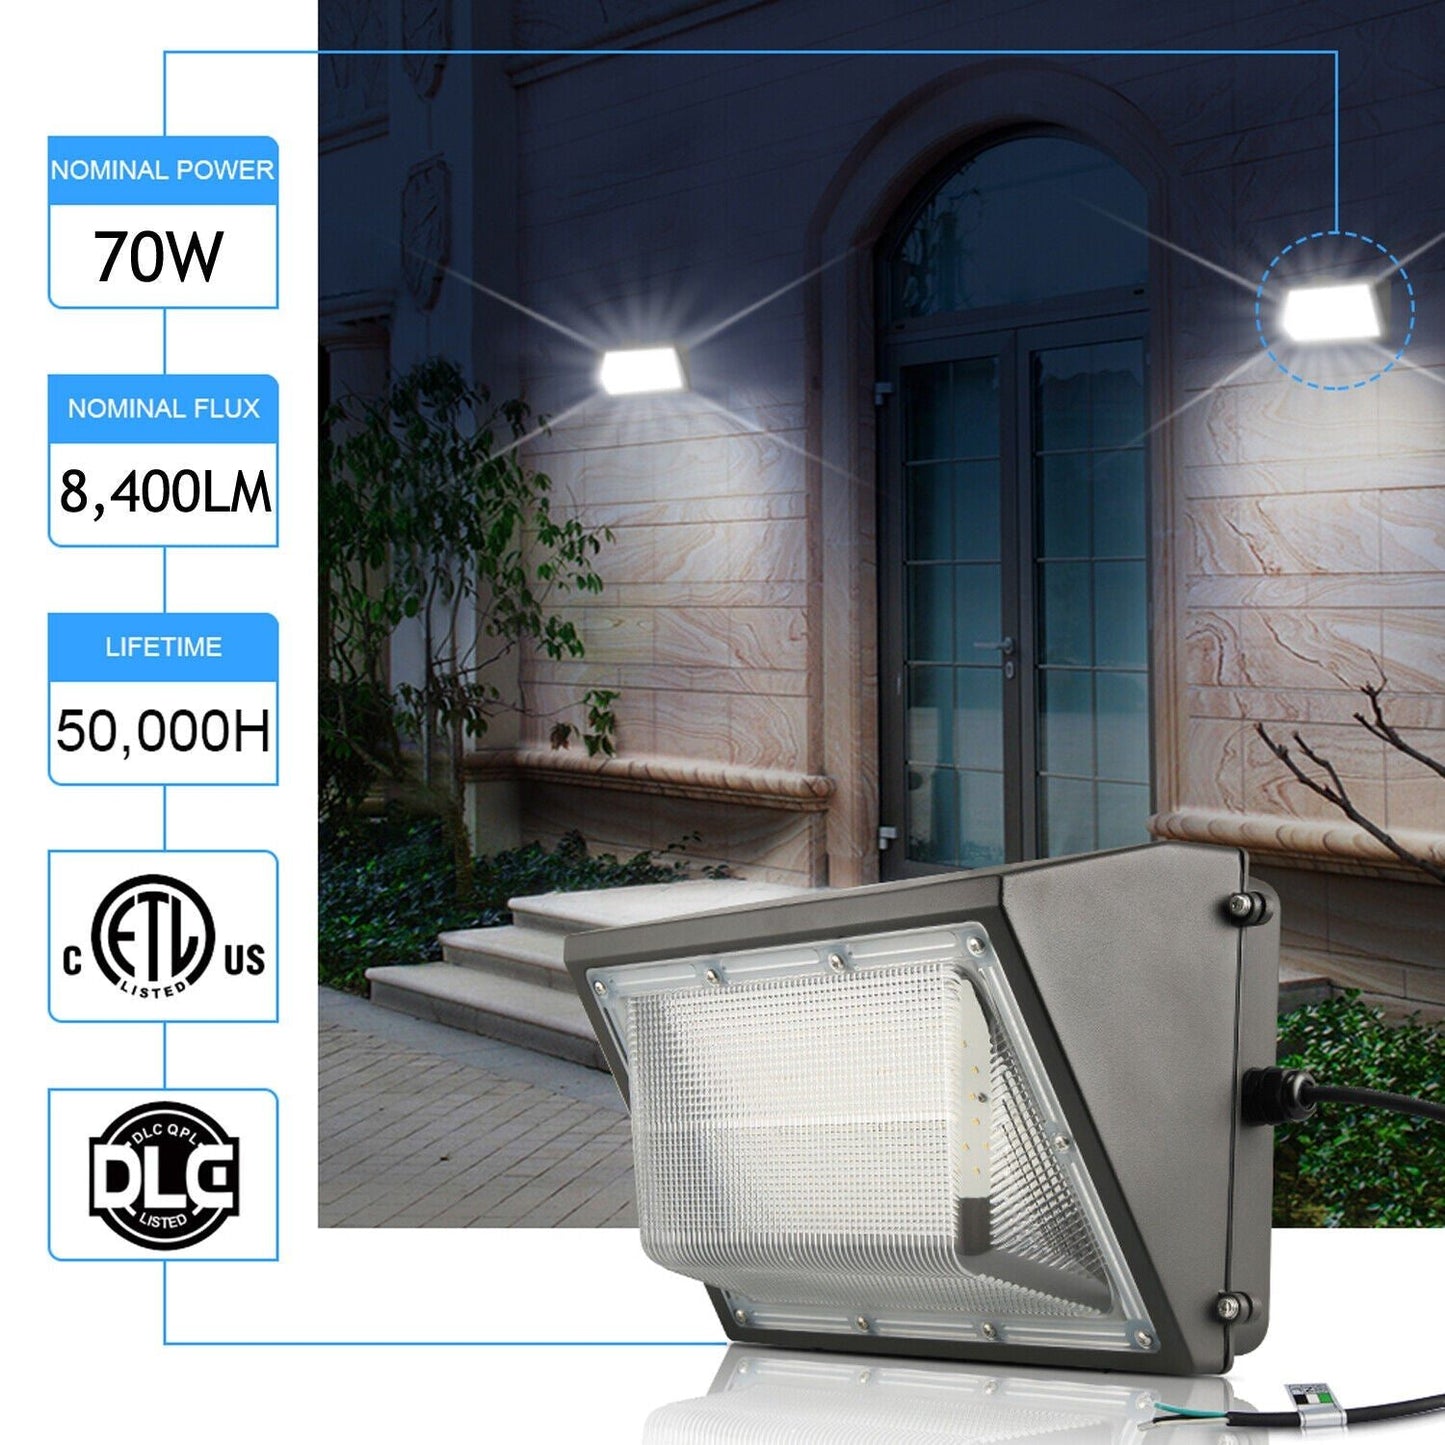 150W/125W Led Wall Pack Light Porch Outdoor Fixture Building Home Warehouse